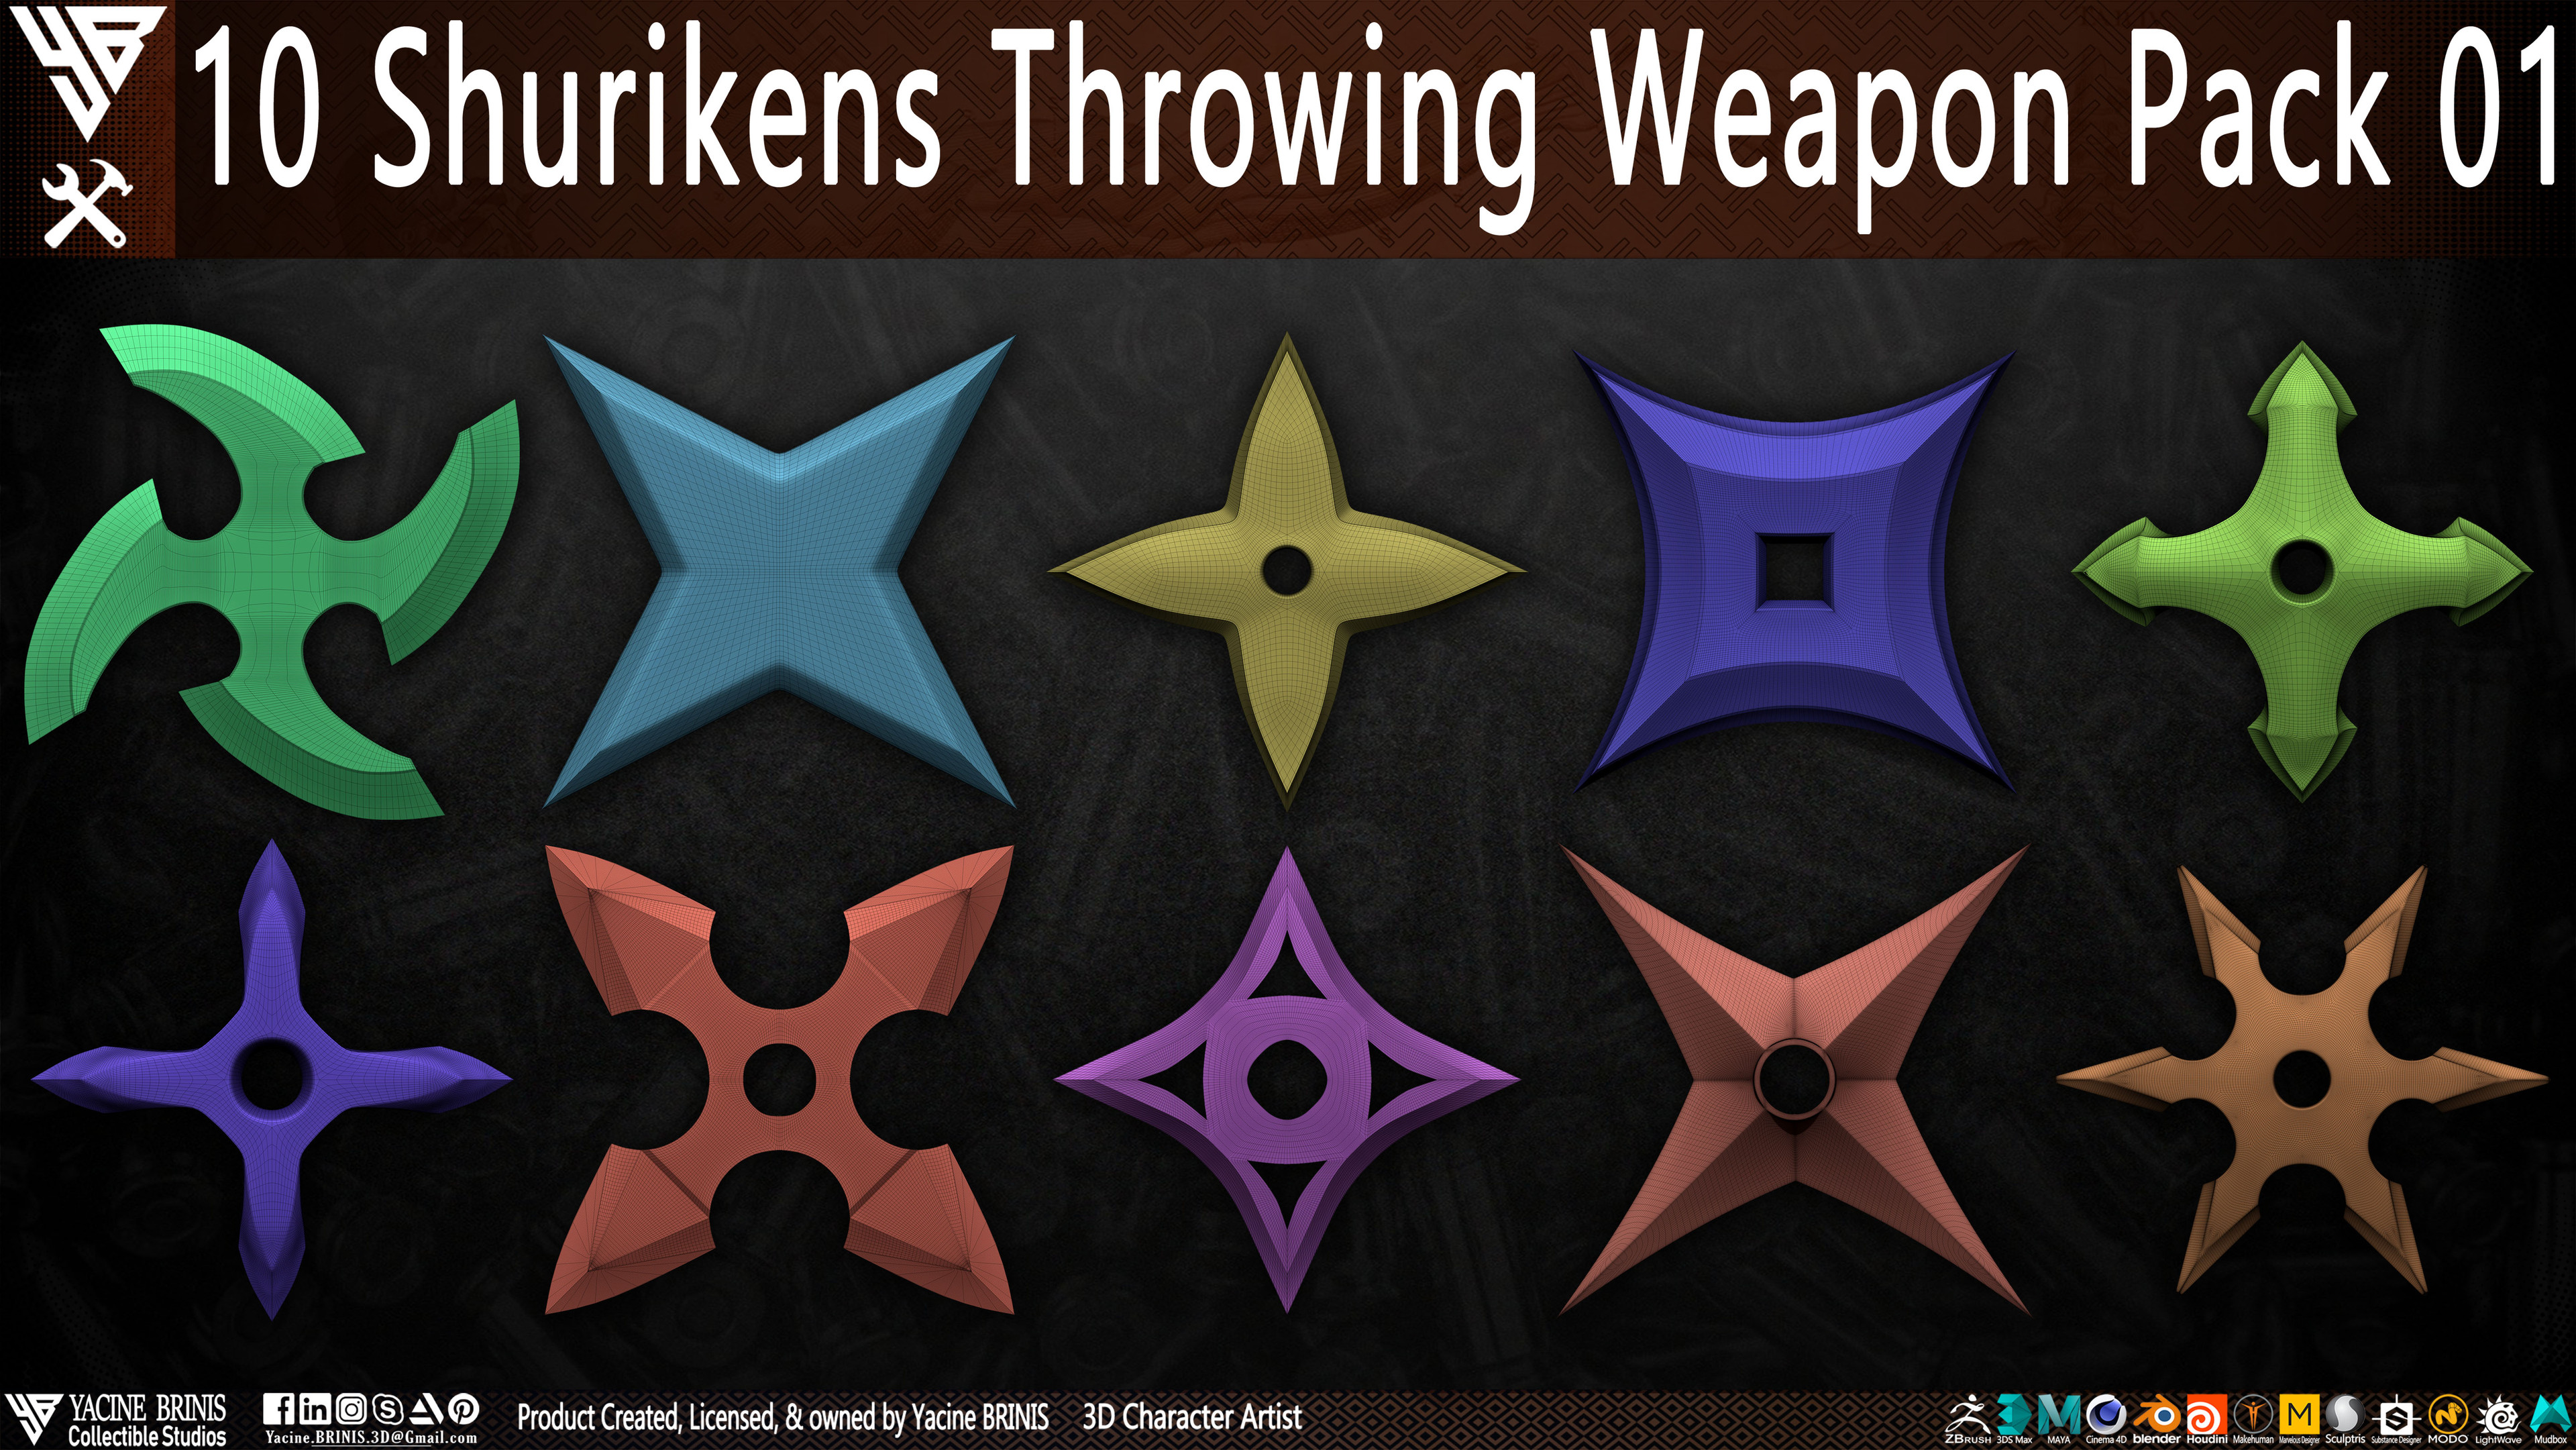 10 Shurikens Throwing Weapon Pack 01 sculpted by Yacine BRINIS Set 02